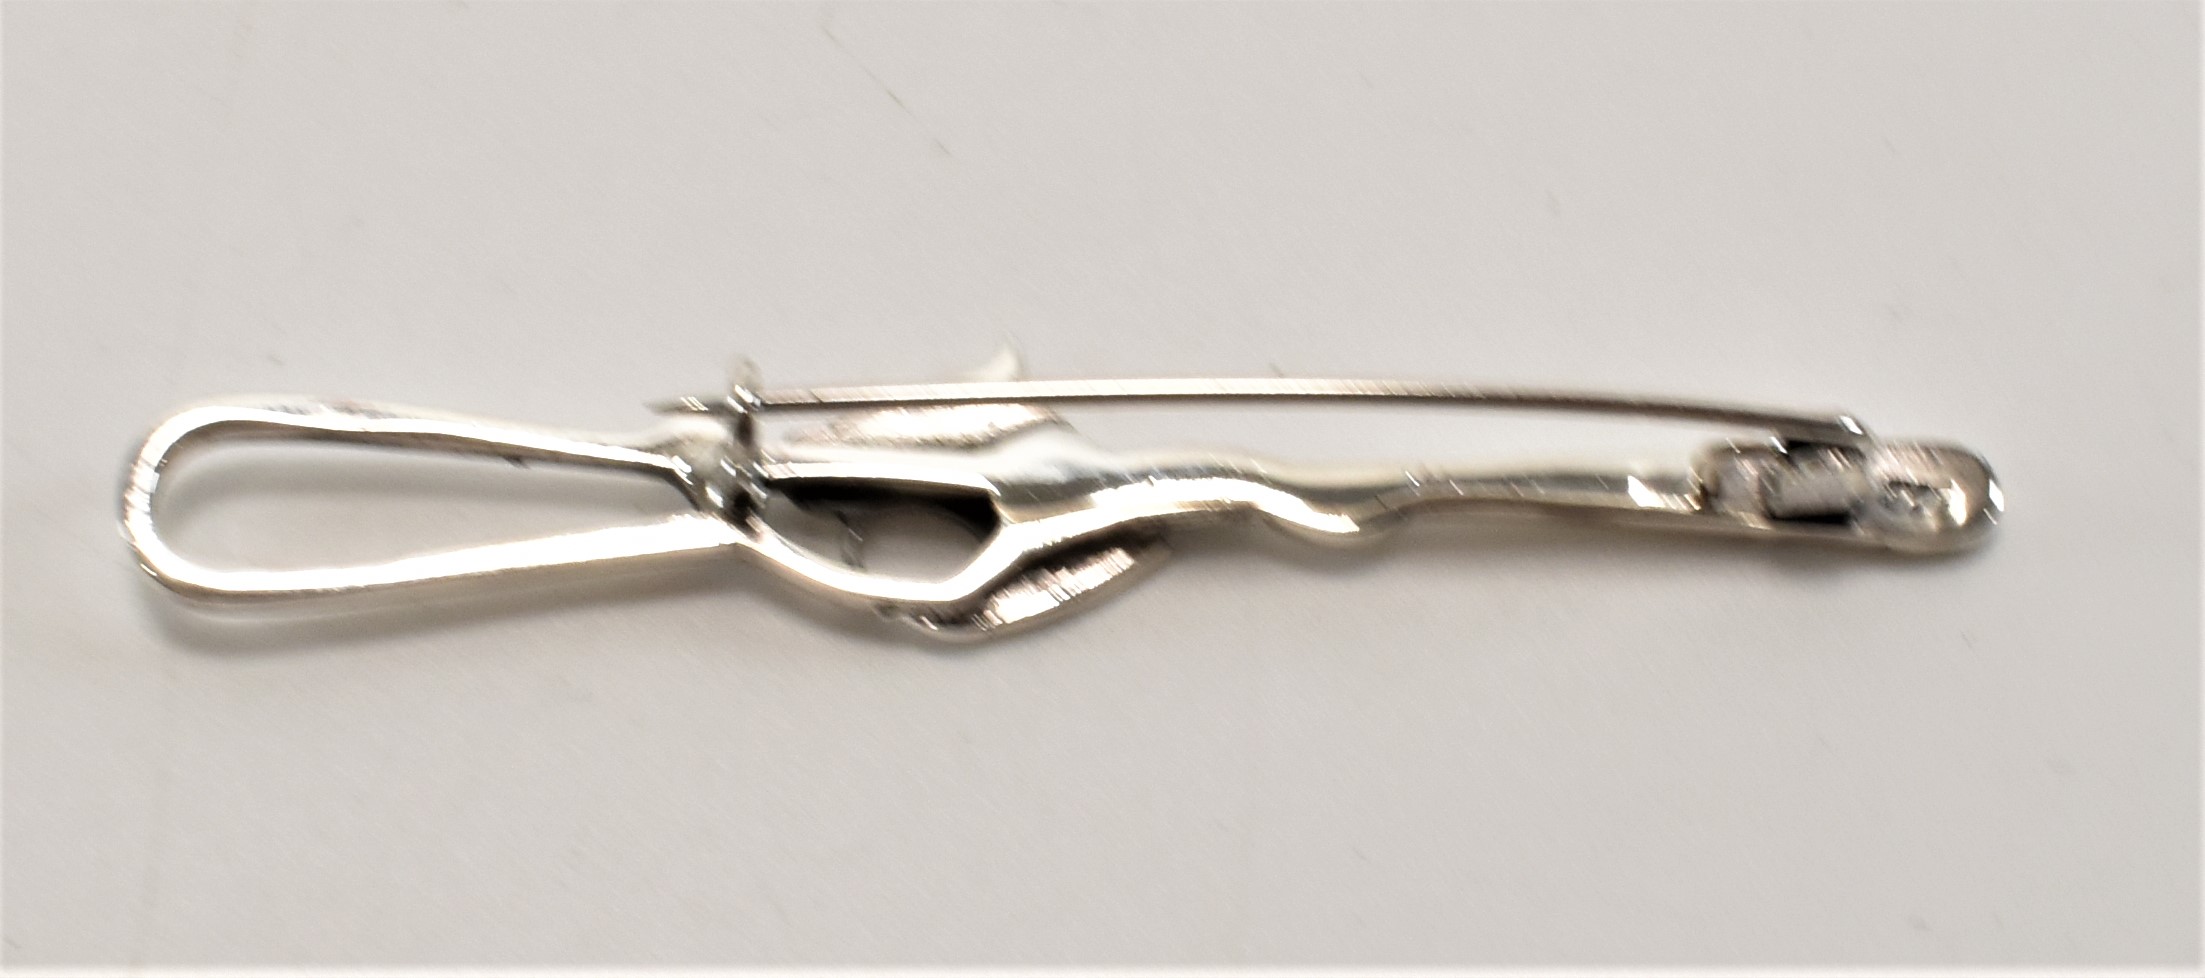 SILVER HORSE WHIP BROOCH - Image 2 of 3